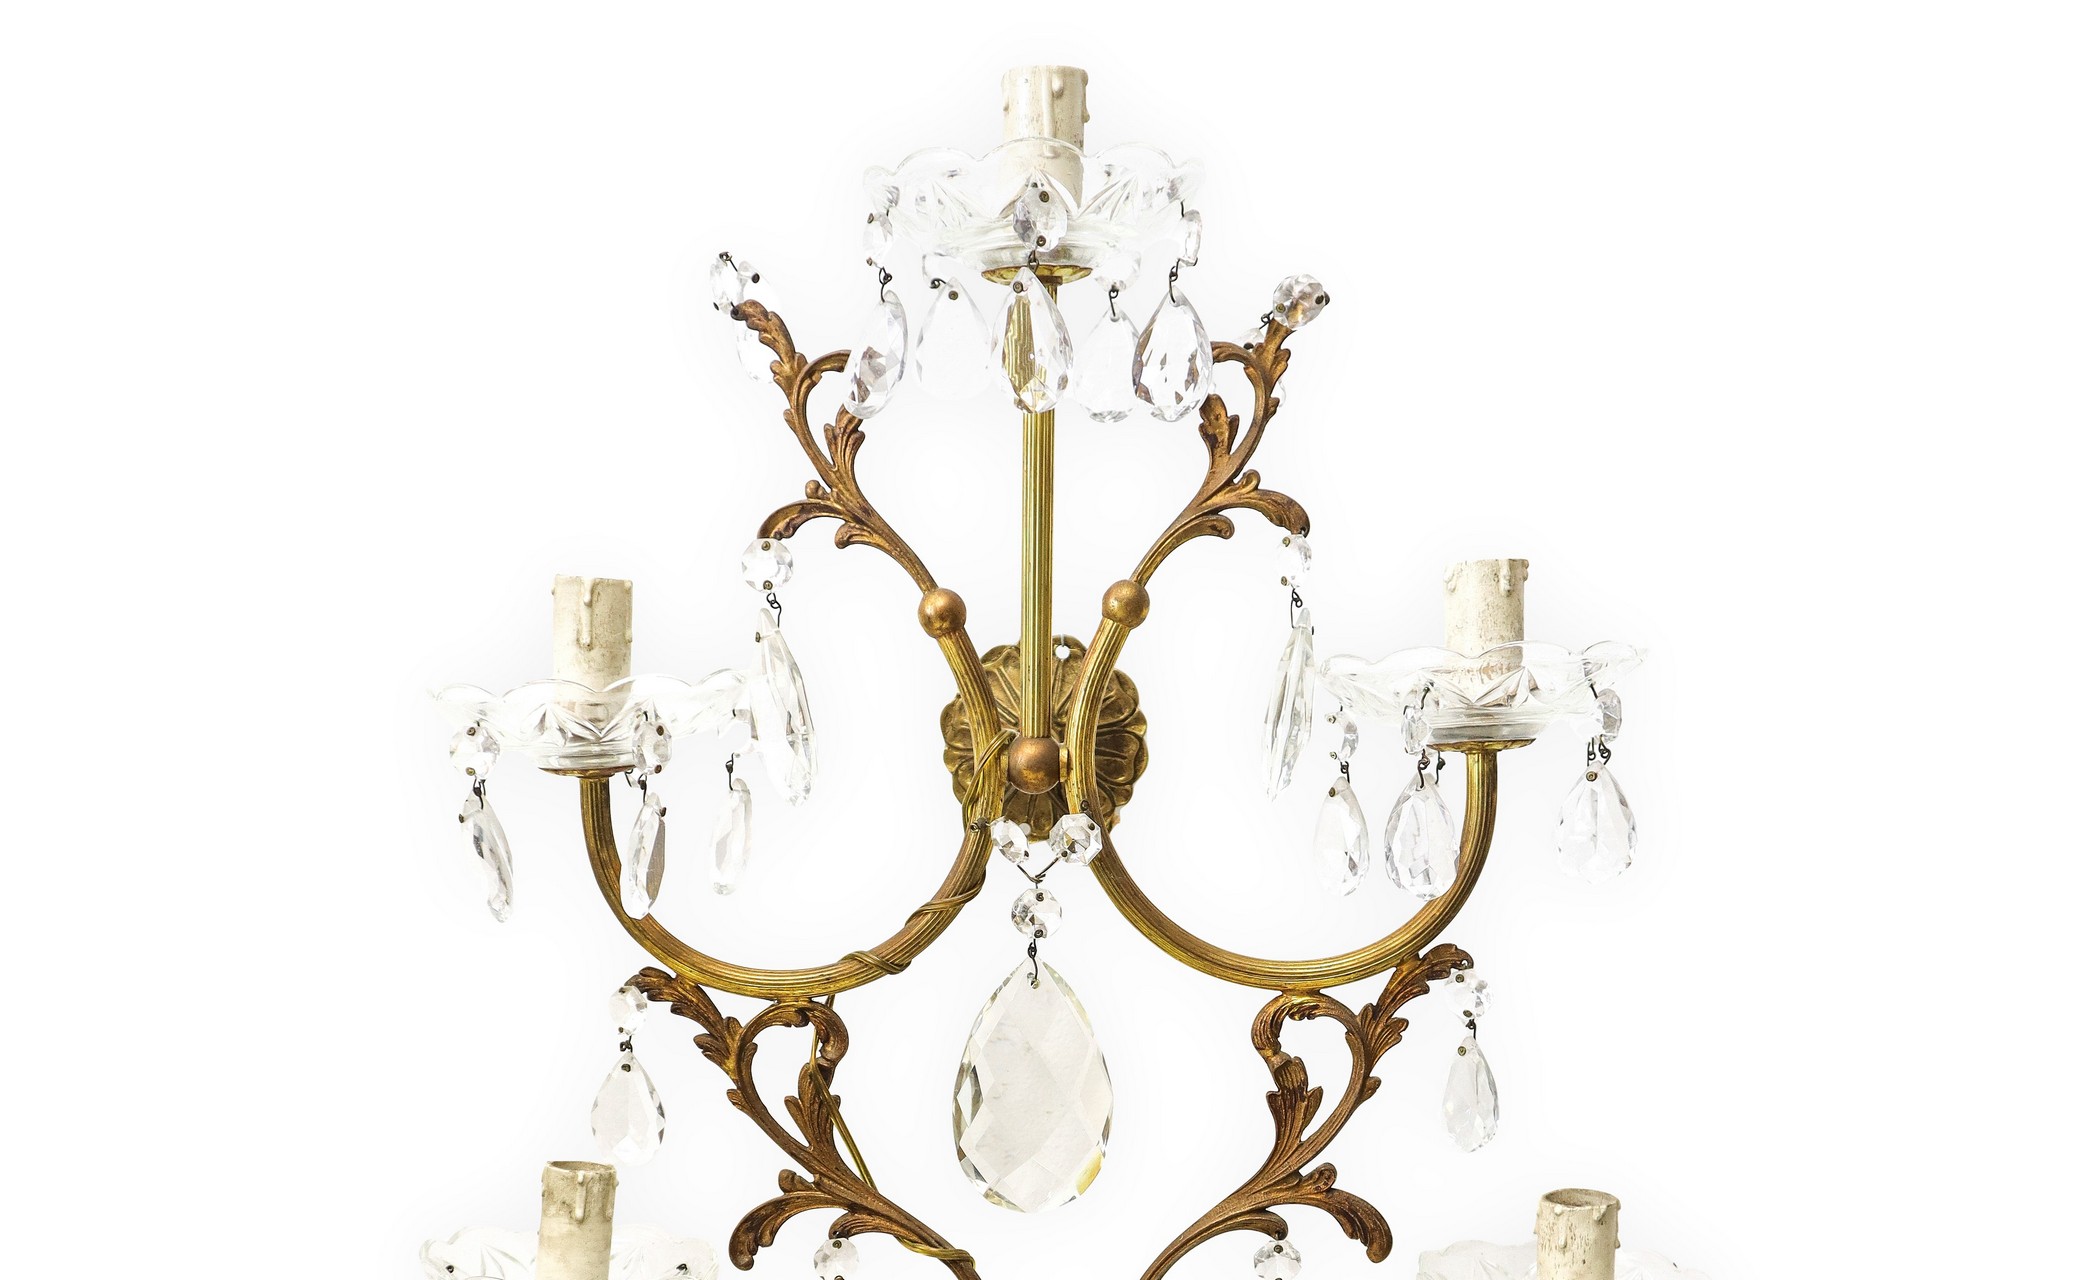 Pair of 5-light wall sconces, 20th century - Image 2 of 3